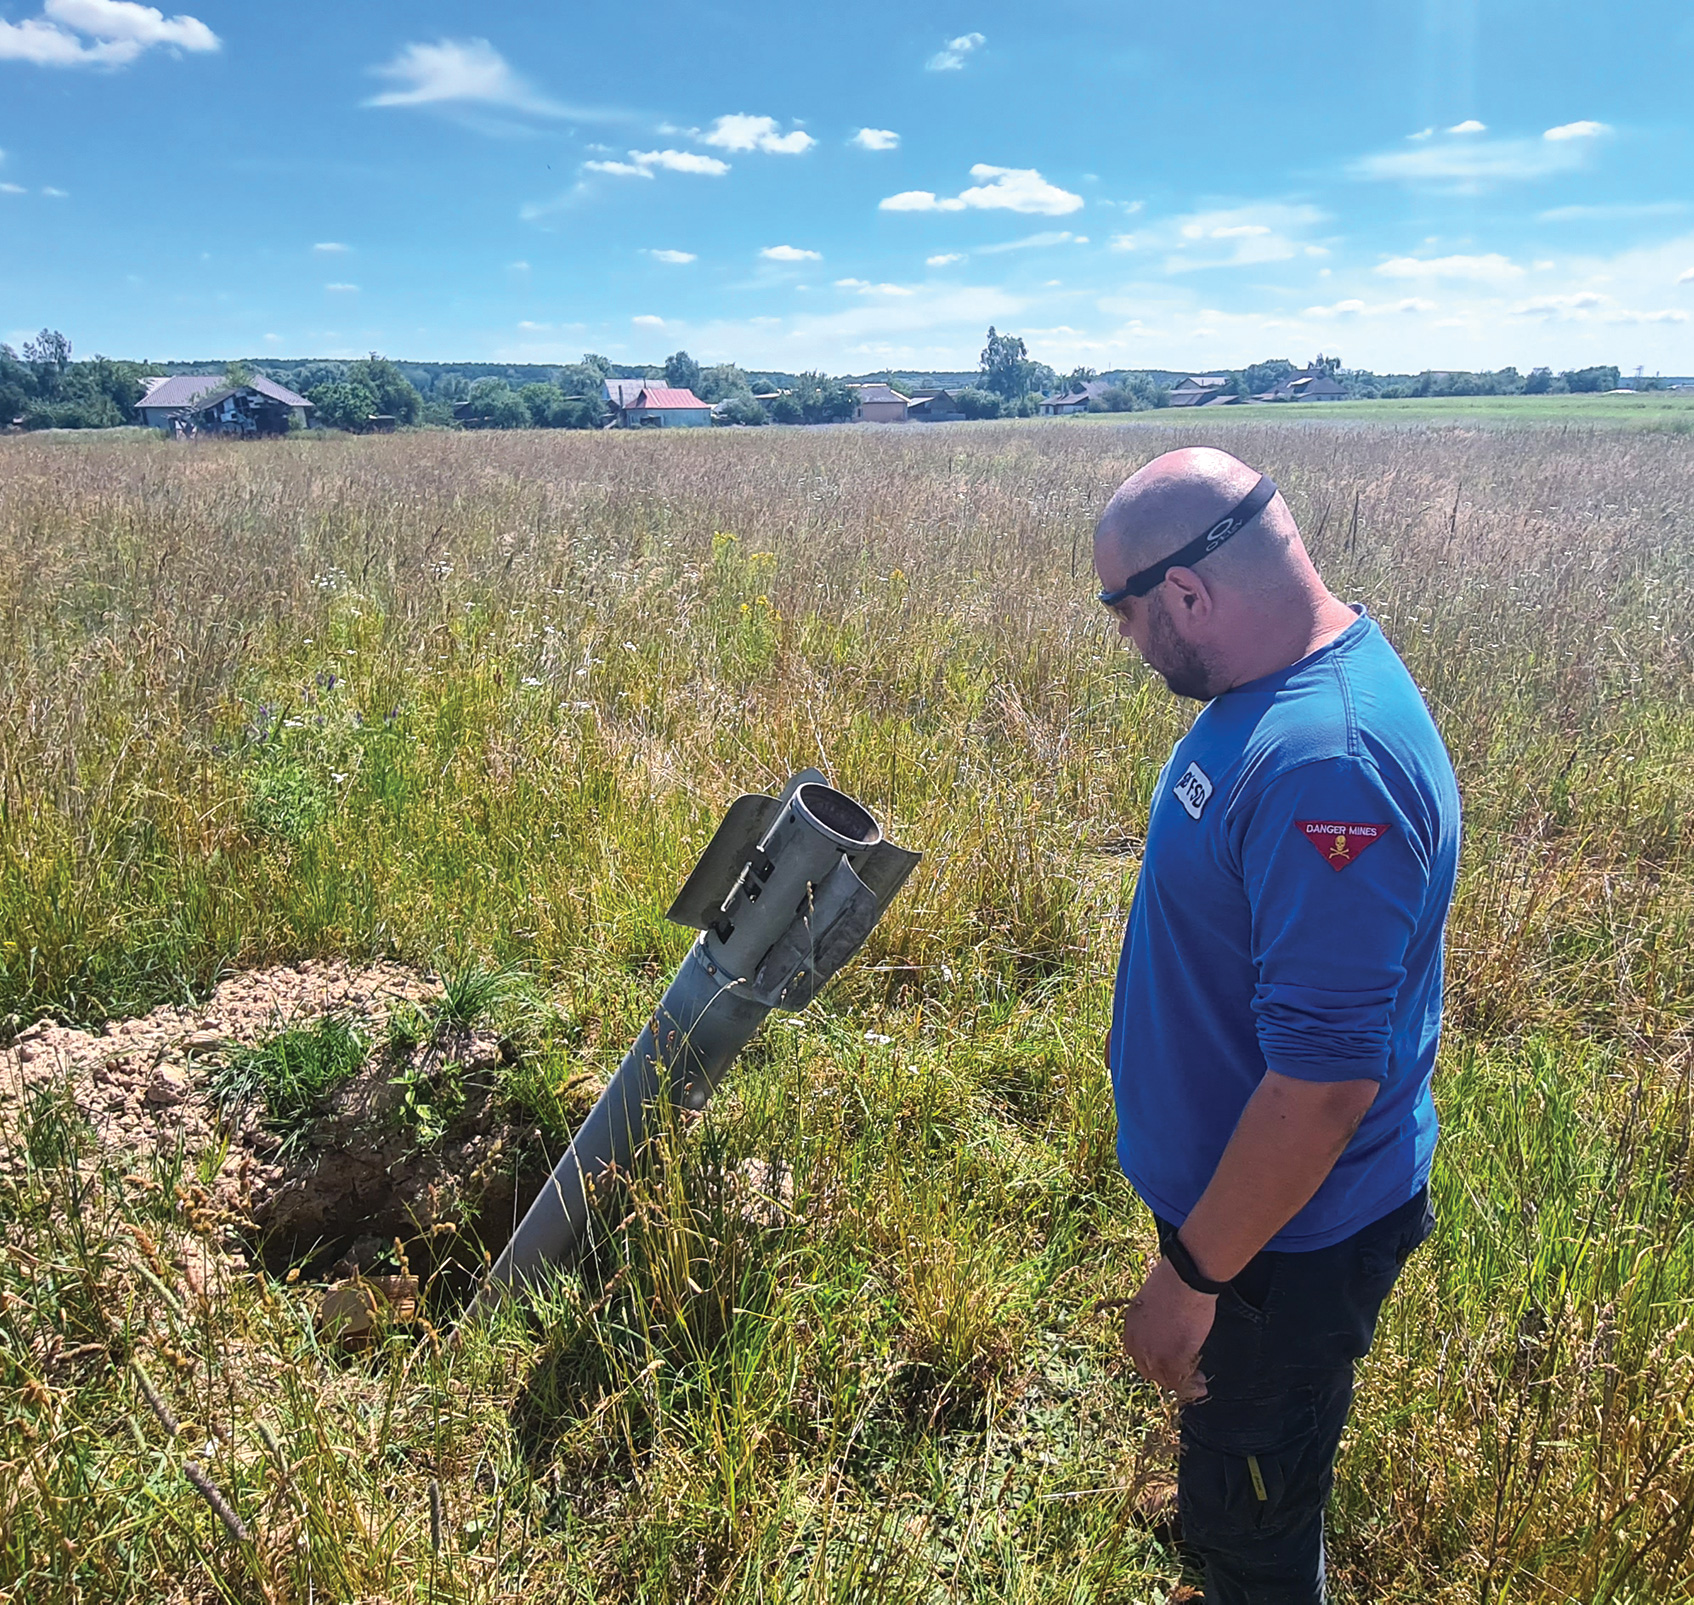 A man in a field stands next to an unexploded rocket sticking out of the ground.